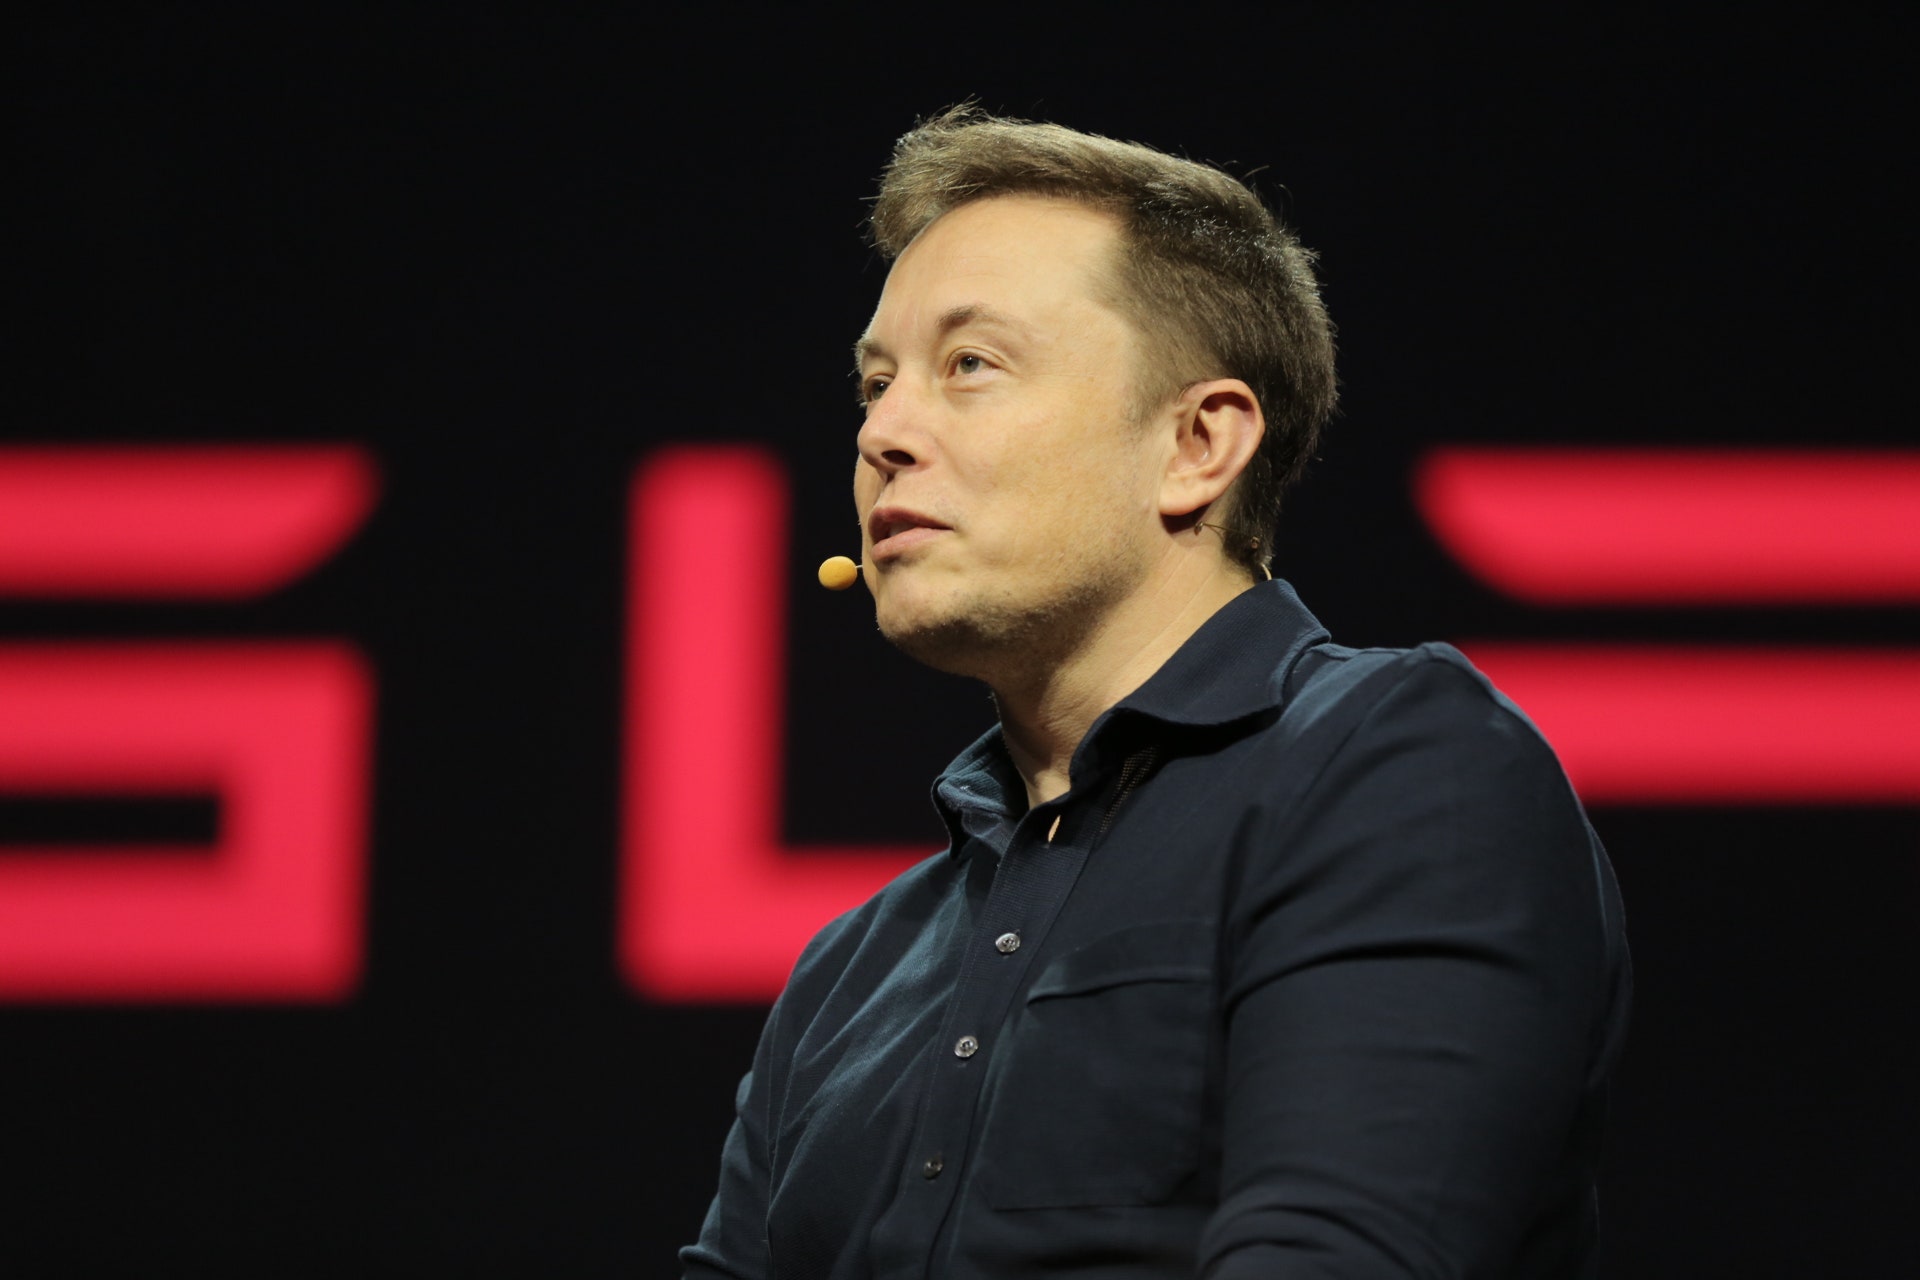 Elon Musk Sells Another $1B Worth Of Tesla Shares